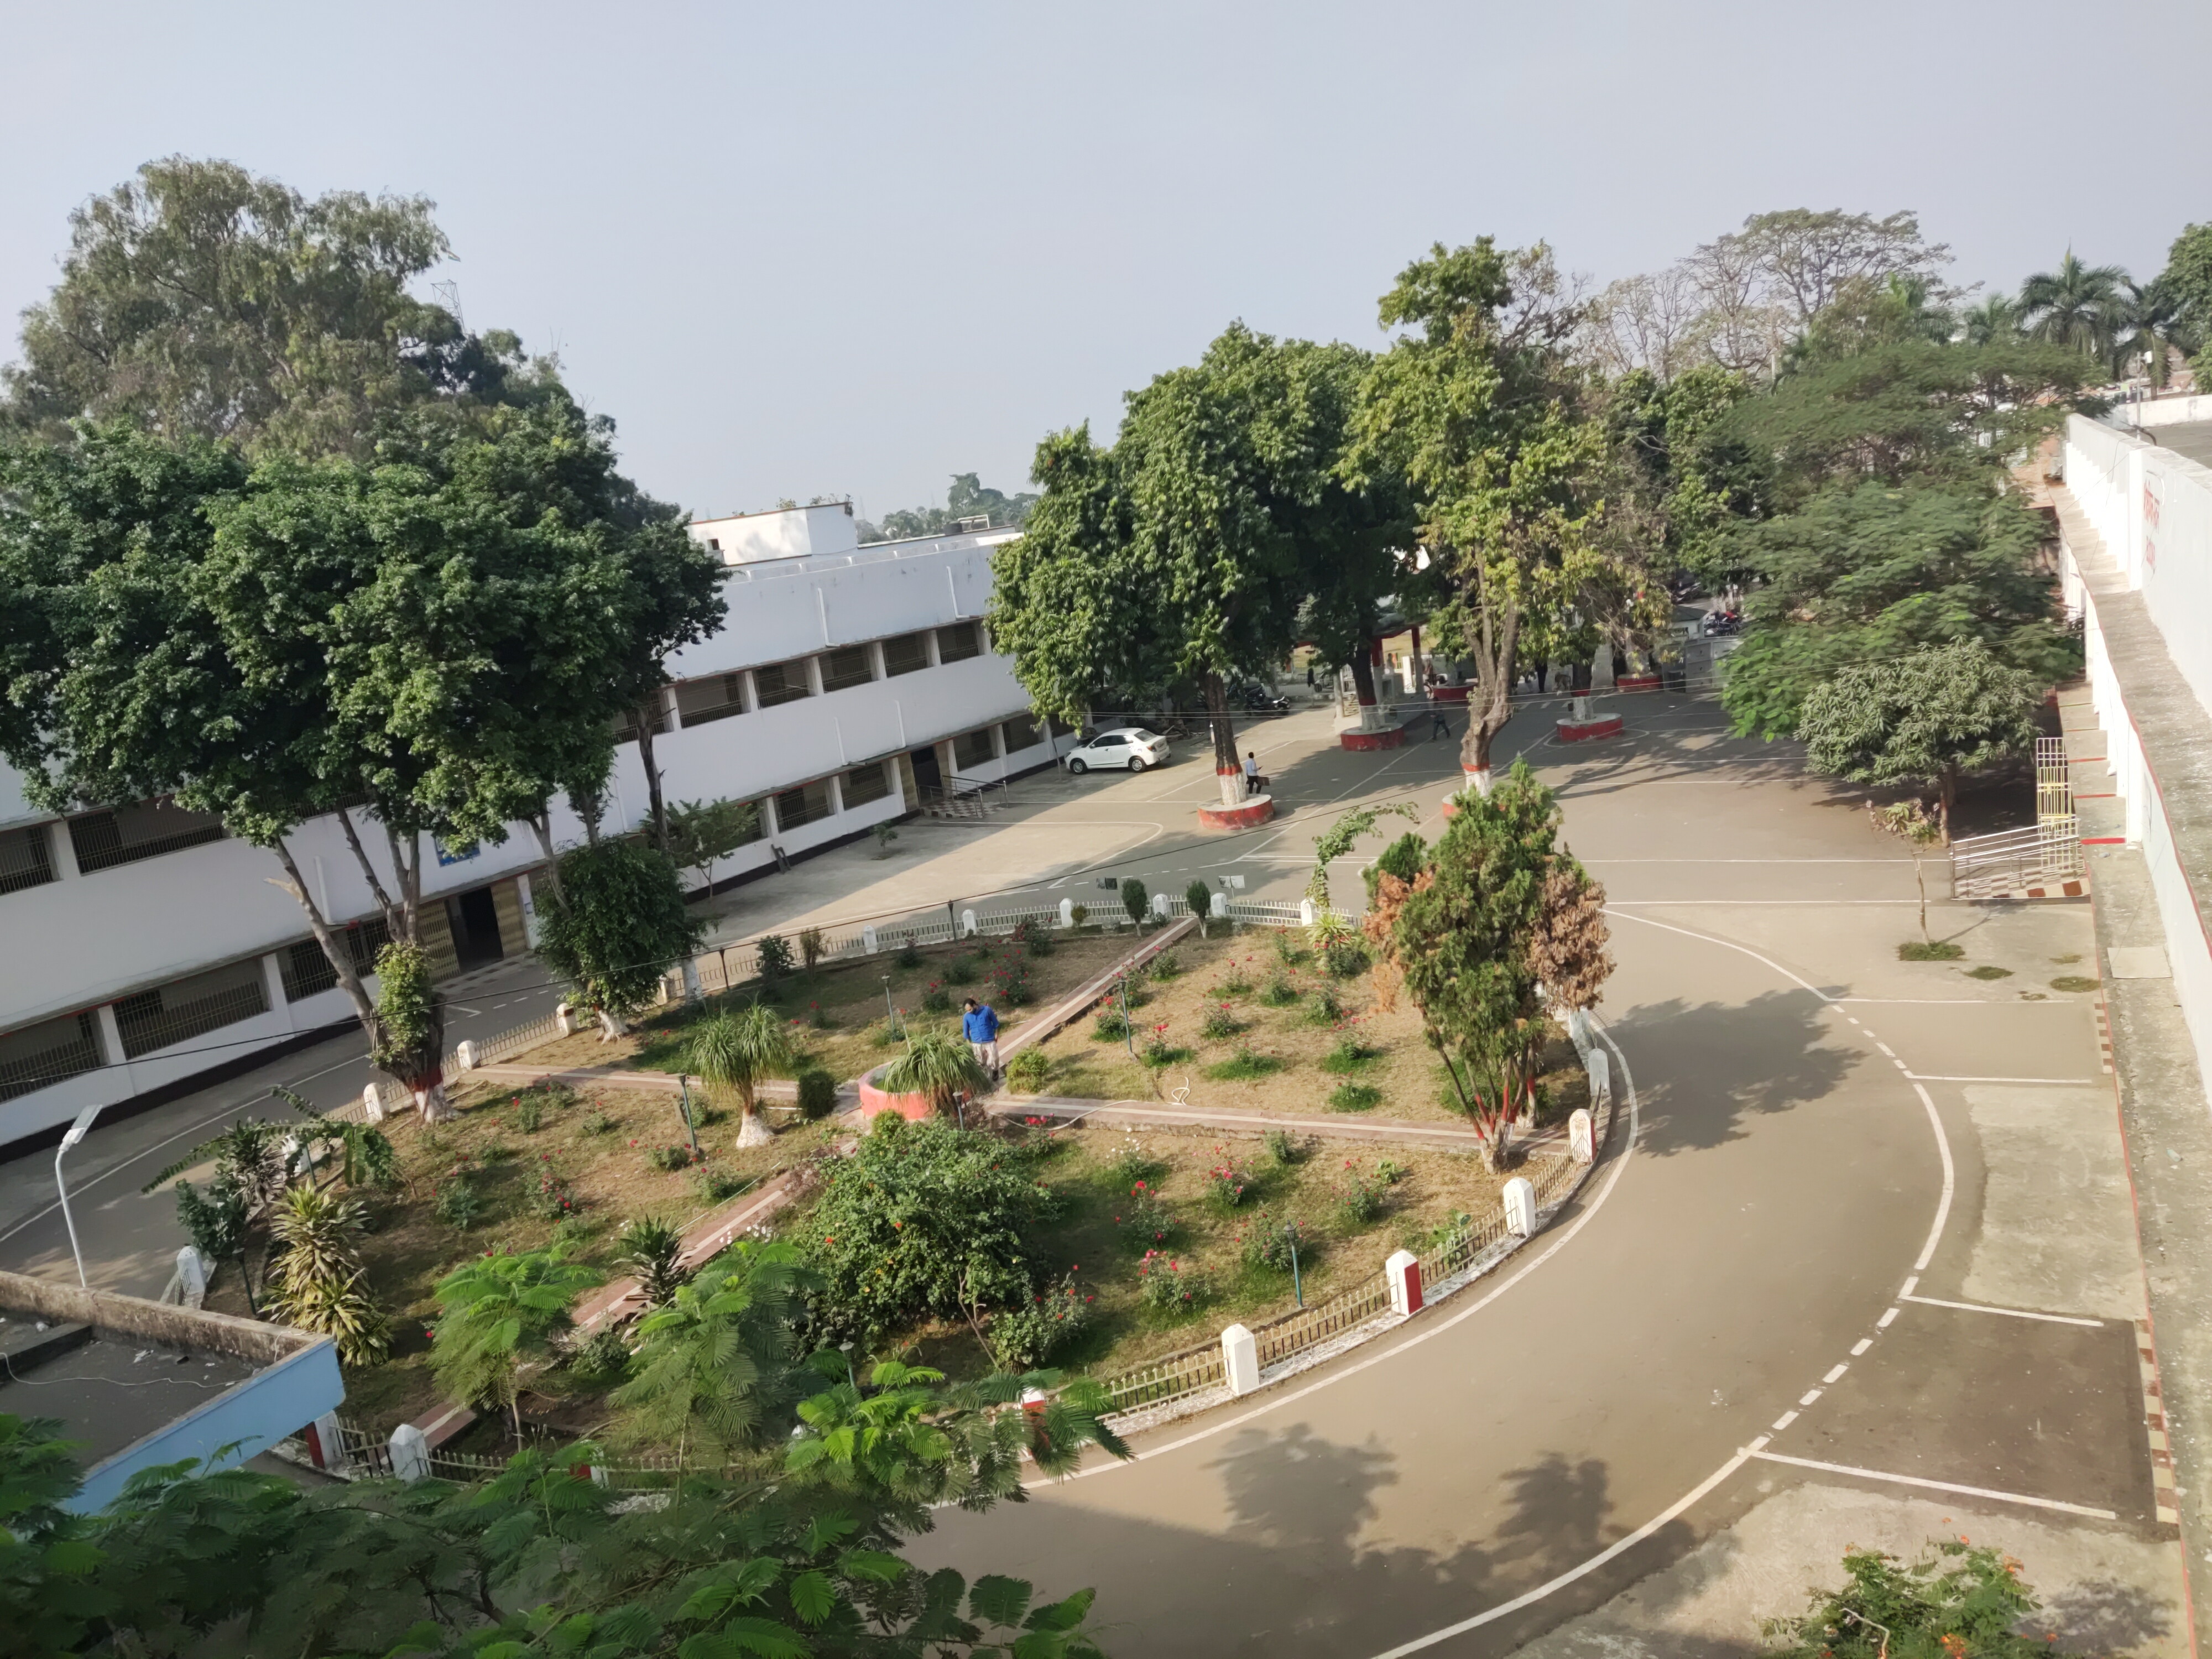 Glimpses of our College Campus